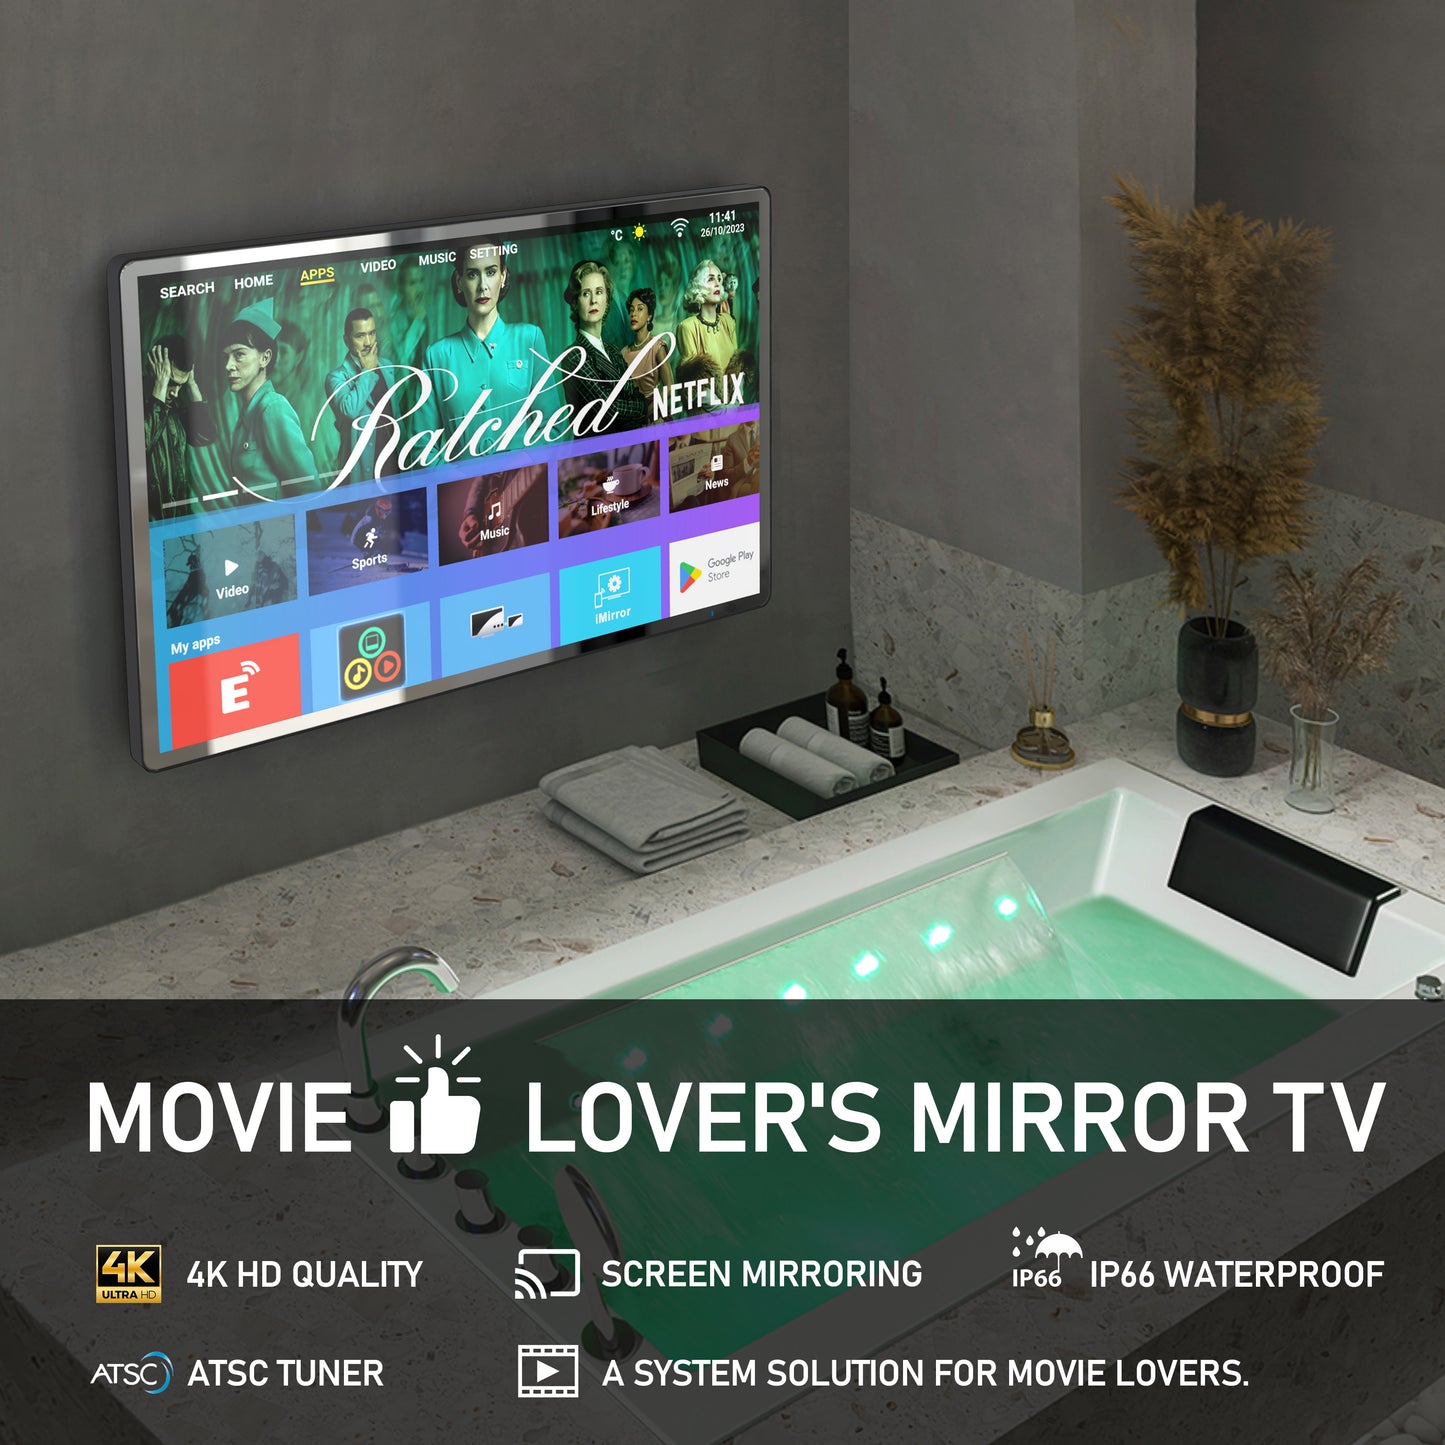 4K Ultra HD 32-inch High-end Bathroom Mirror TV IP66 Waterproof Android TV Supports Voice Remote Control Google Assistant, Built-in ATSC Tuner, HDMI (ARC), SPDIF (LEOSMDKR-32)